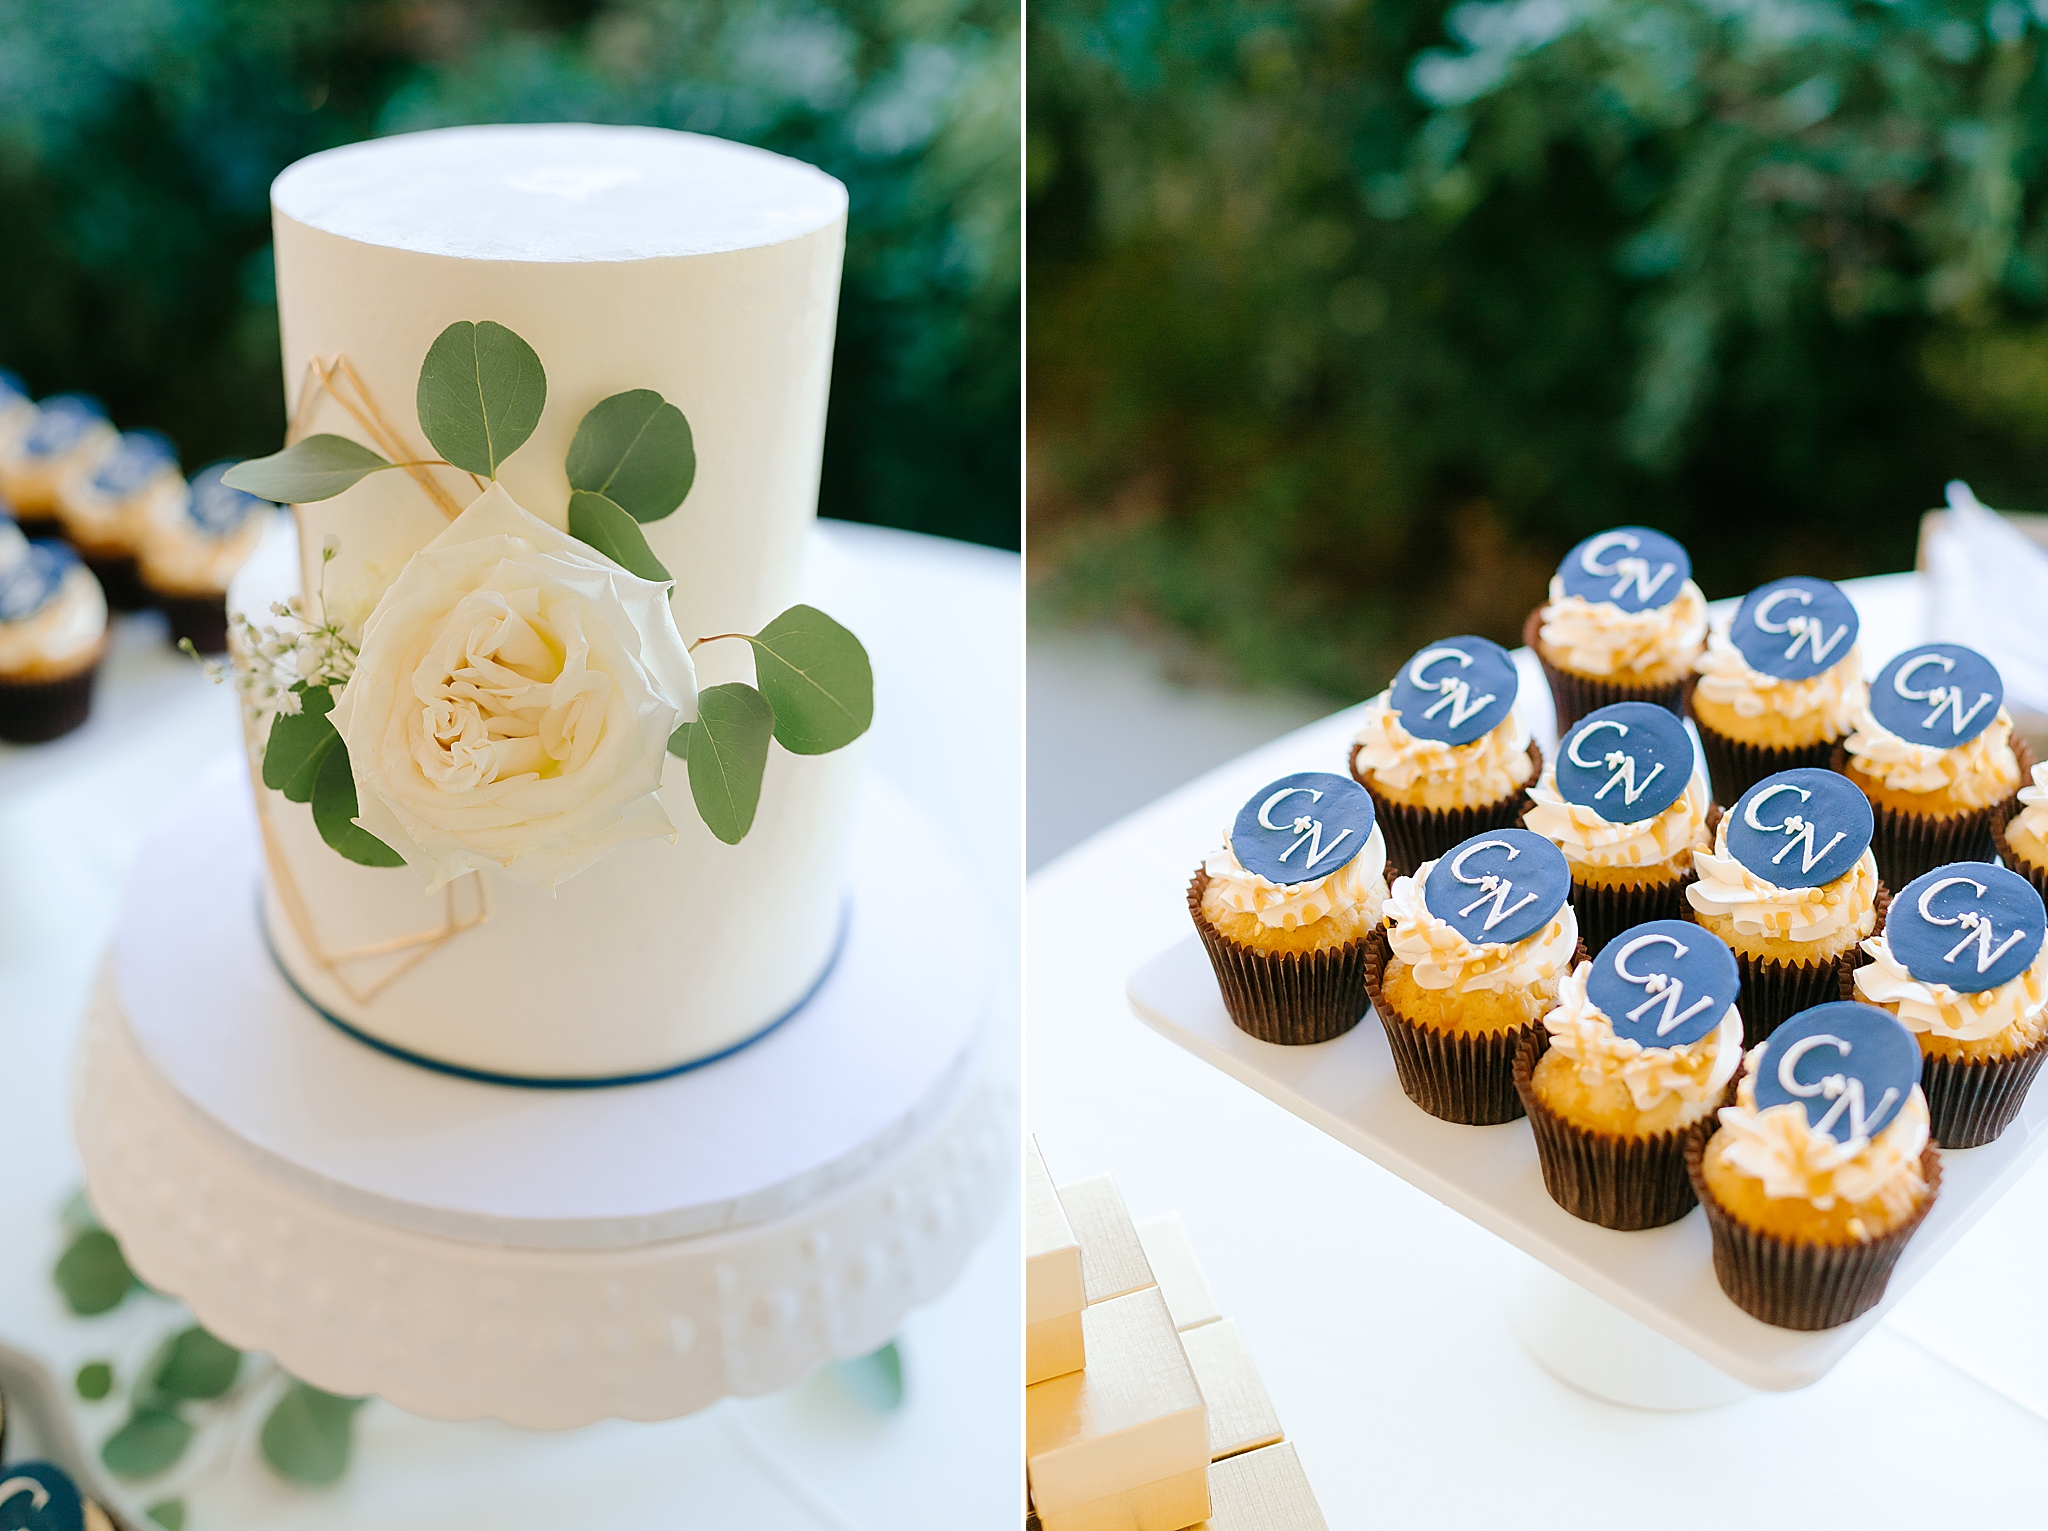 cake and custom cookies for wedding reception